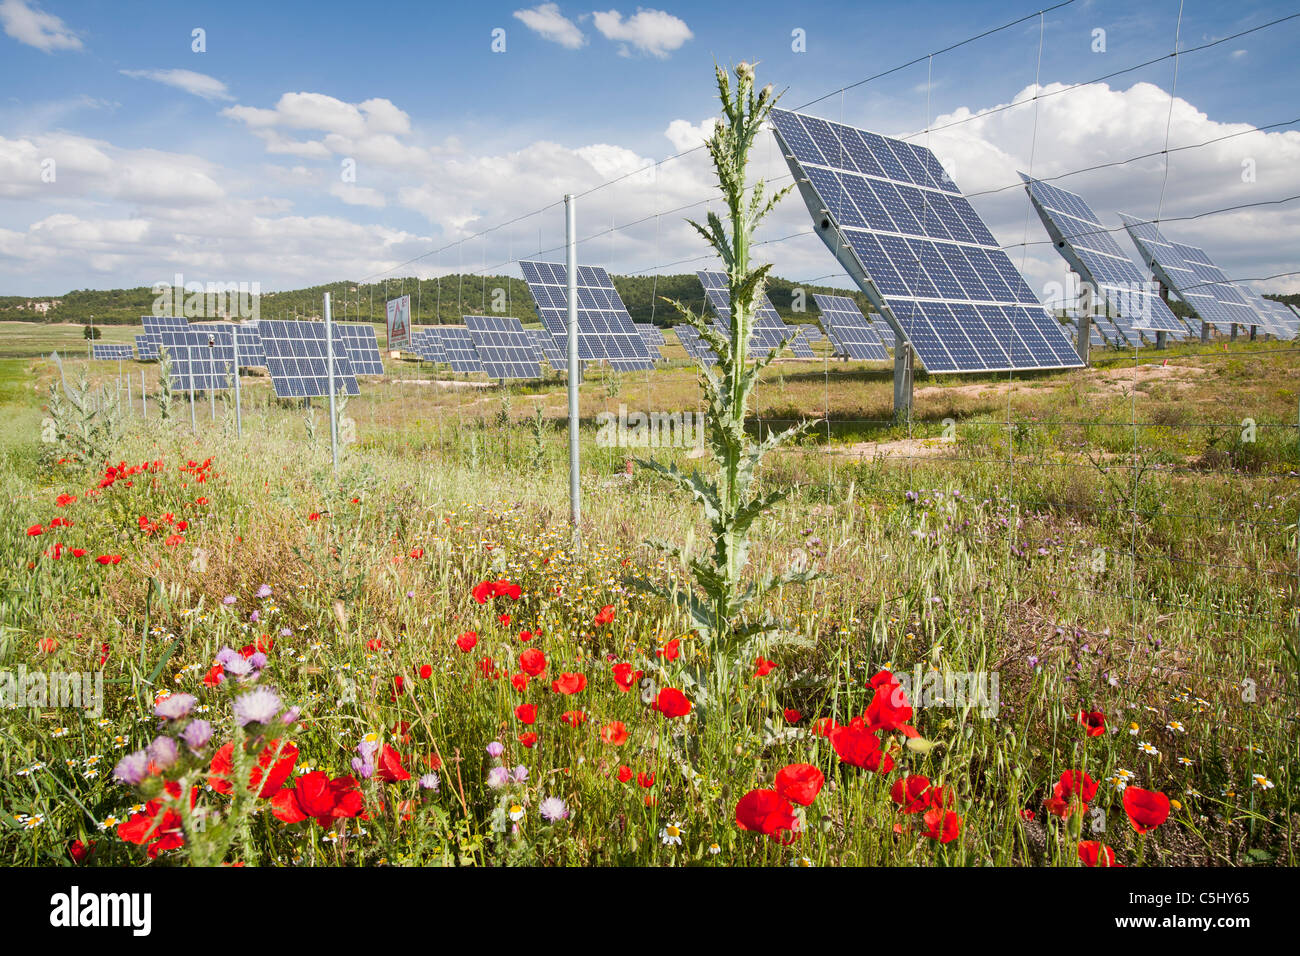 A photo voltaic solar power station near Caravaca, Andalucia, Spain, with wild flowers. Stock Photo